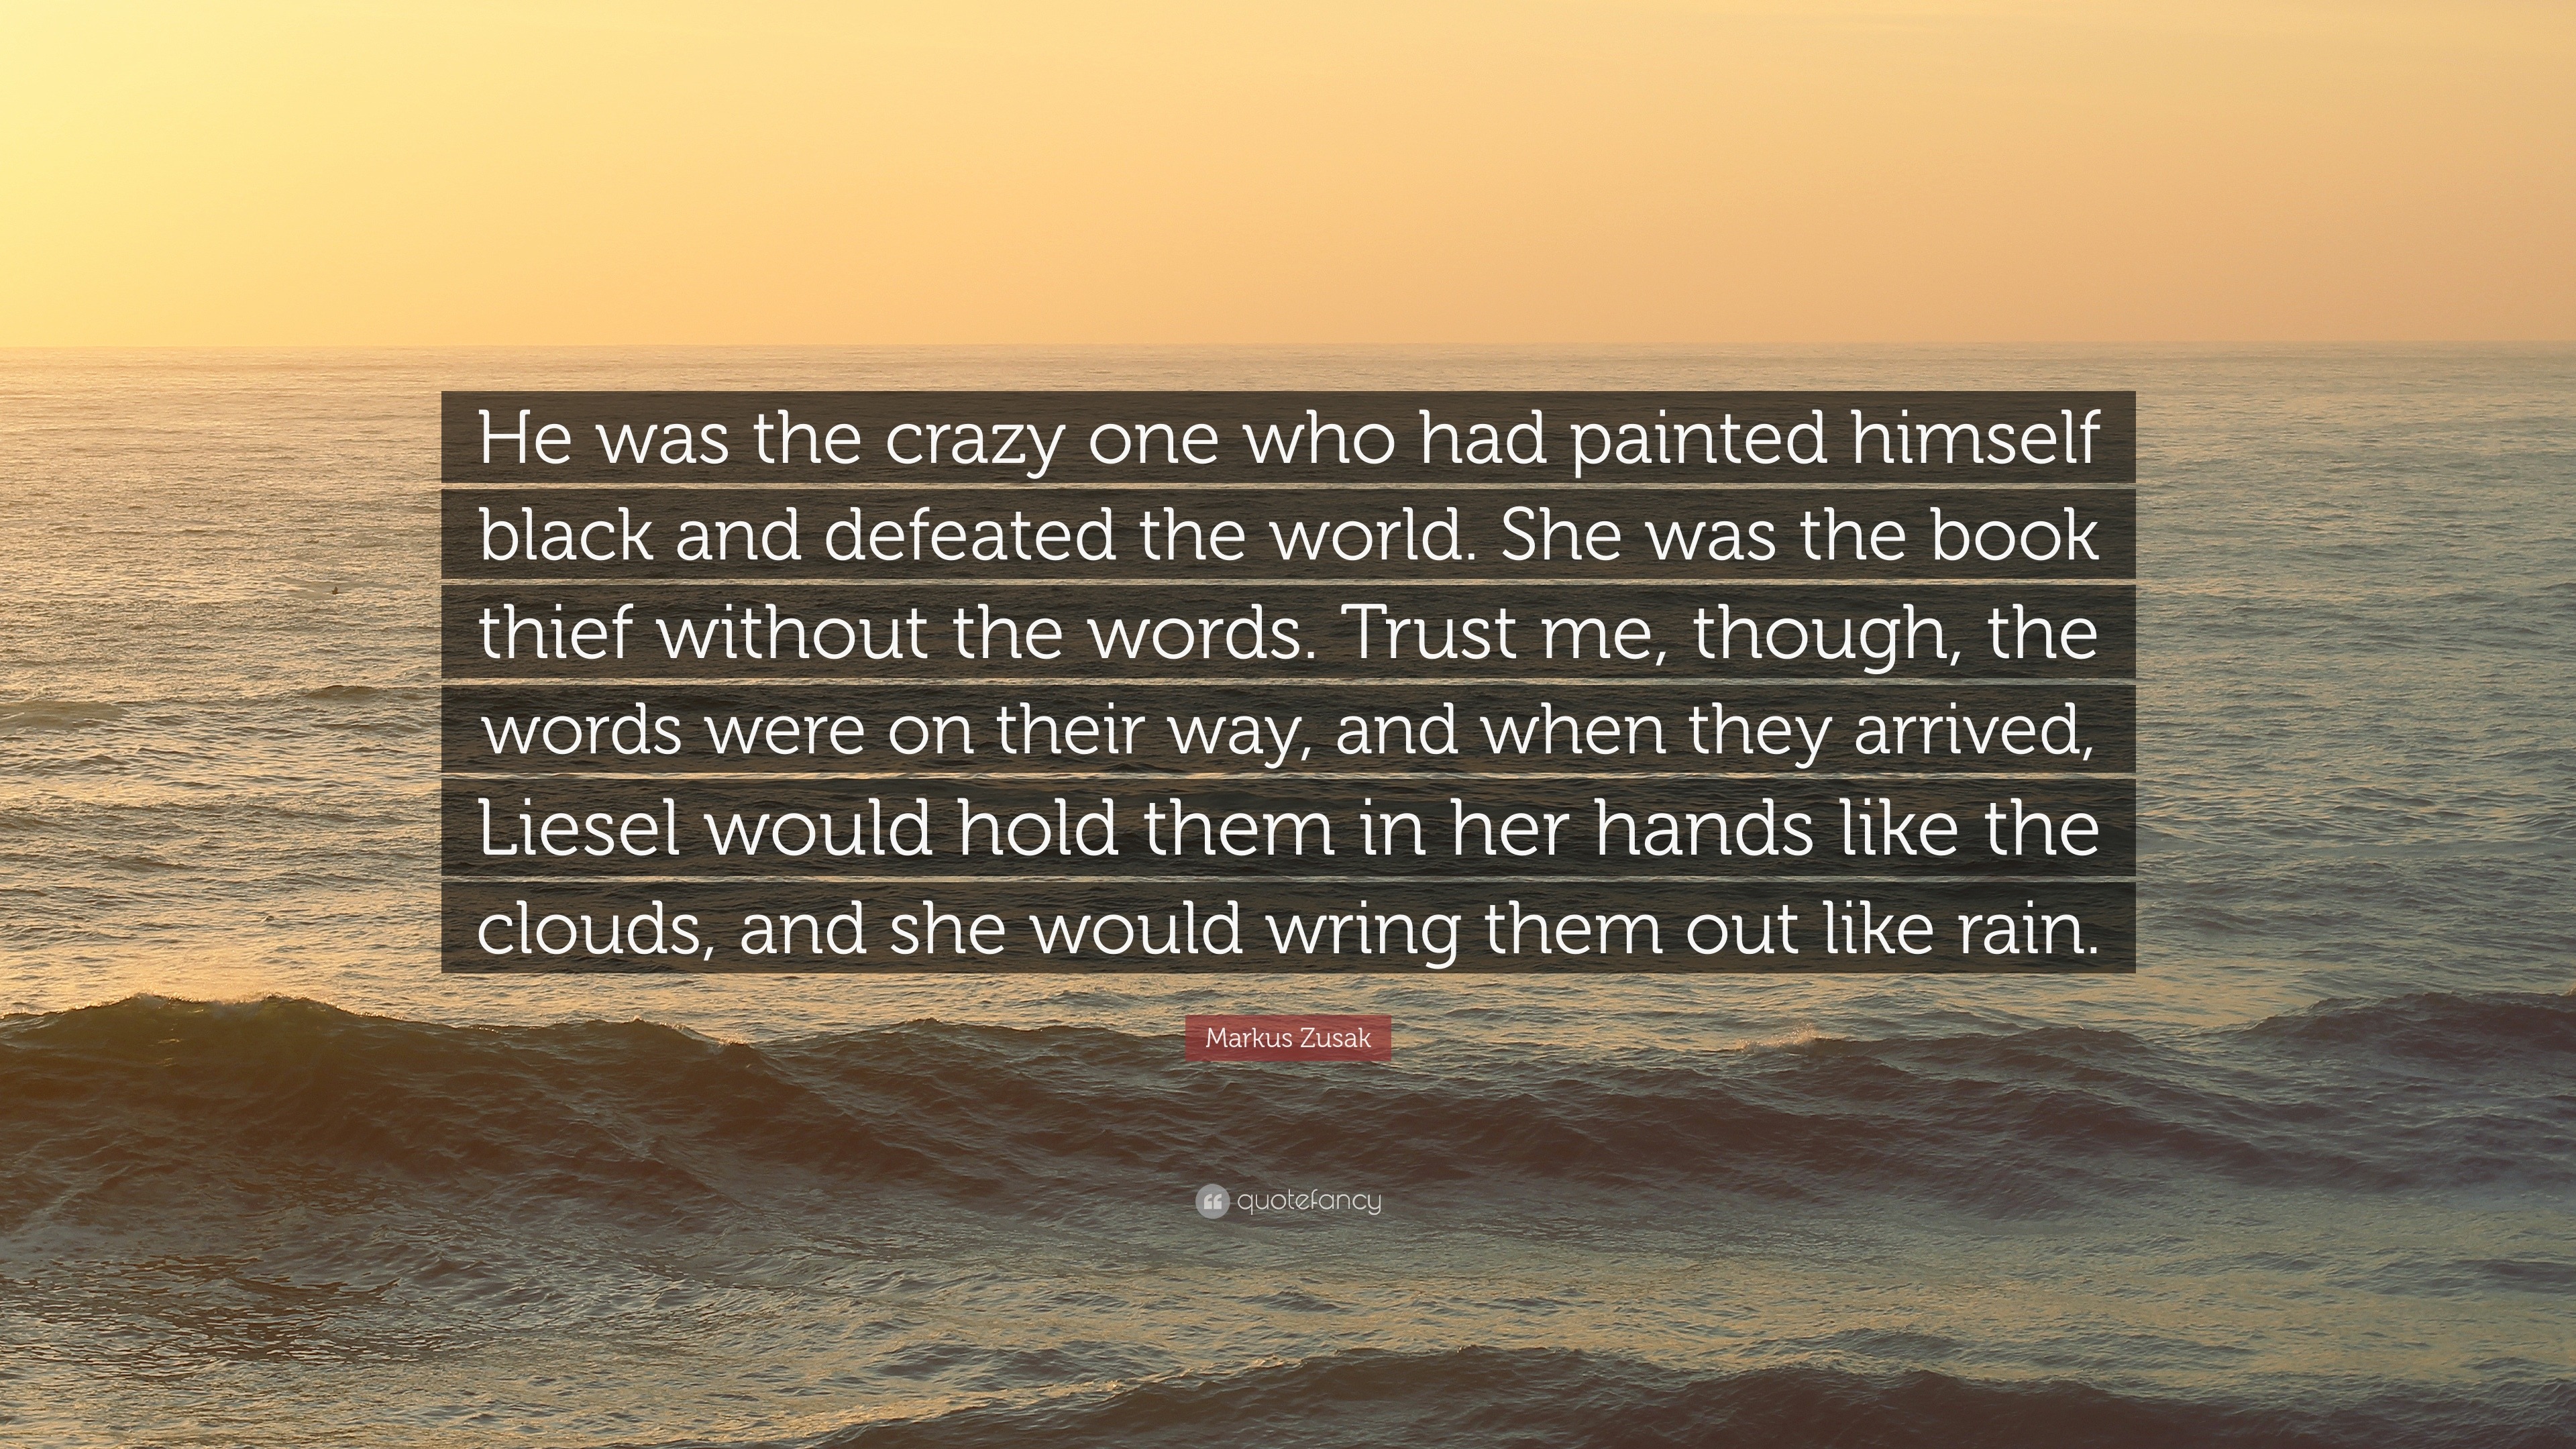 Markus Zusak Quote: “He was the crazy one who had painted himself black and  defeated the world. She was the book thief without the words. Tru...”